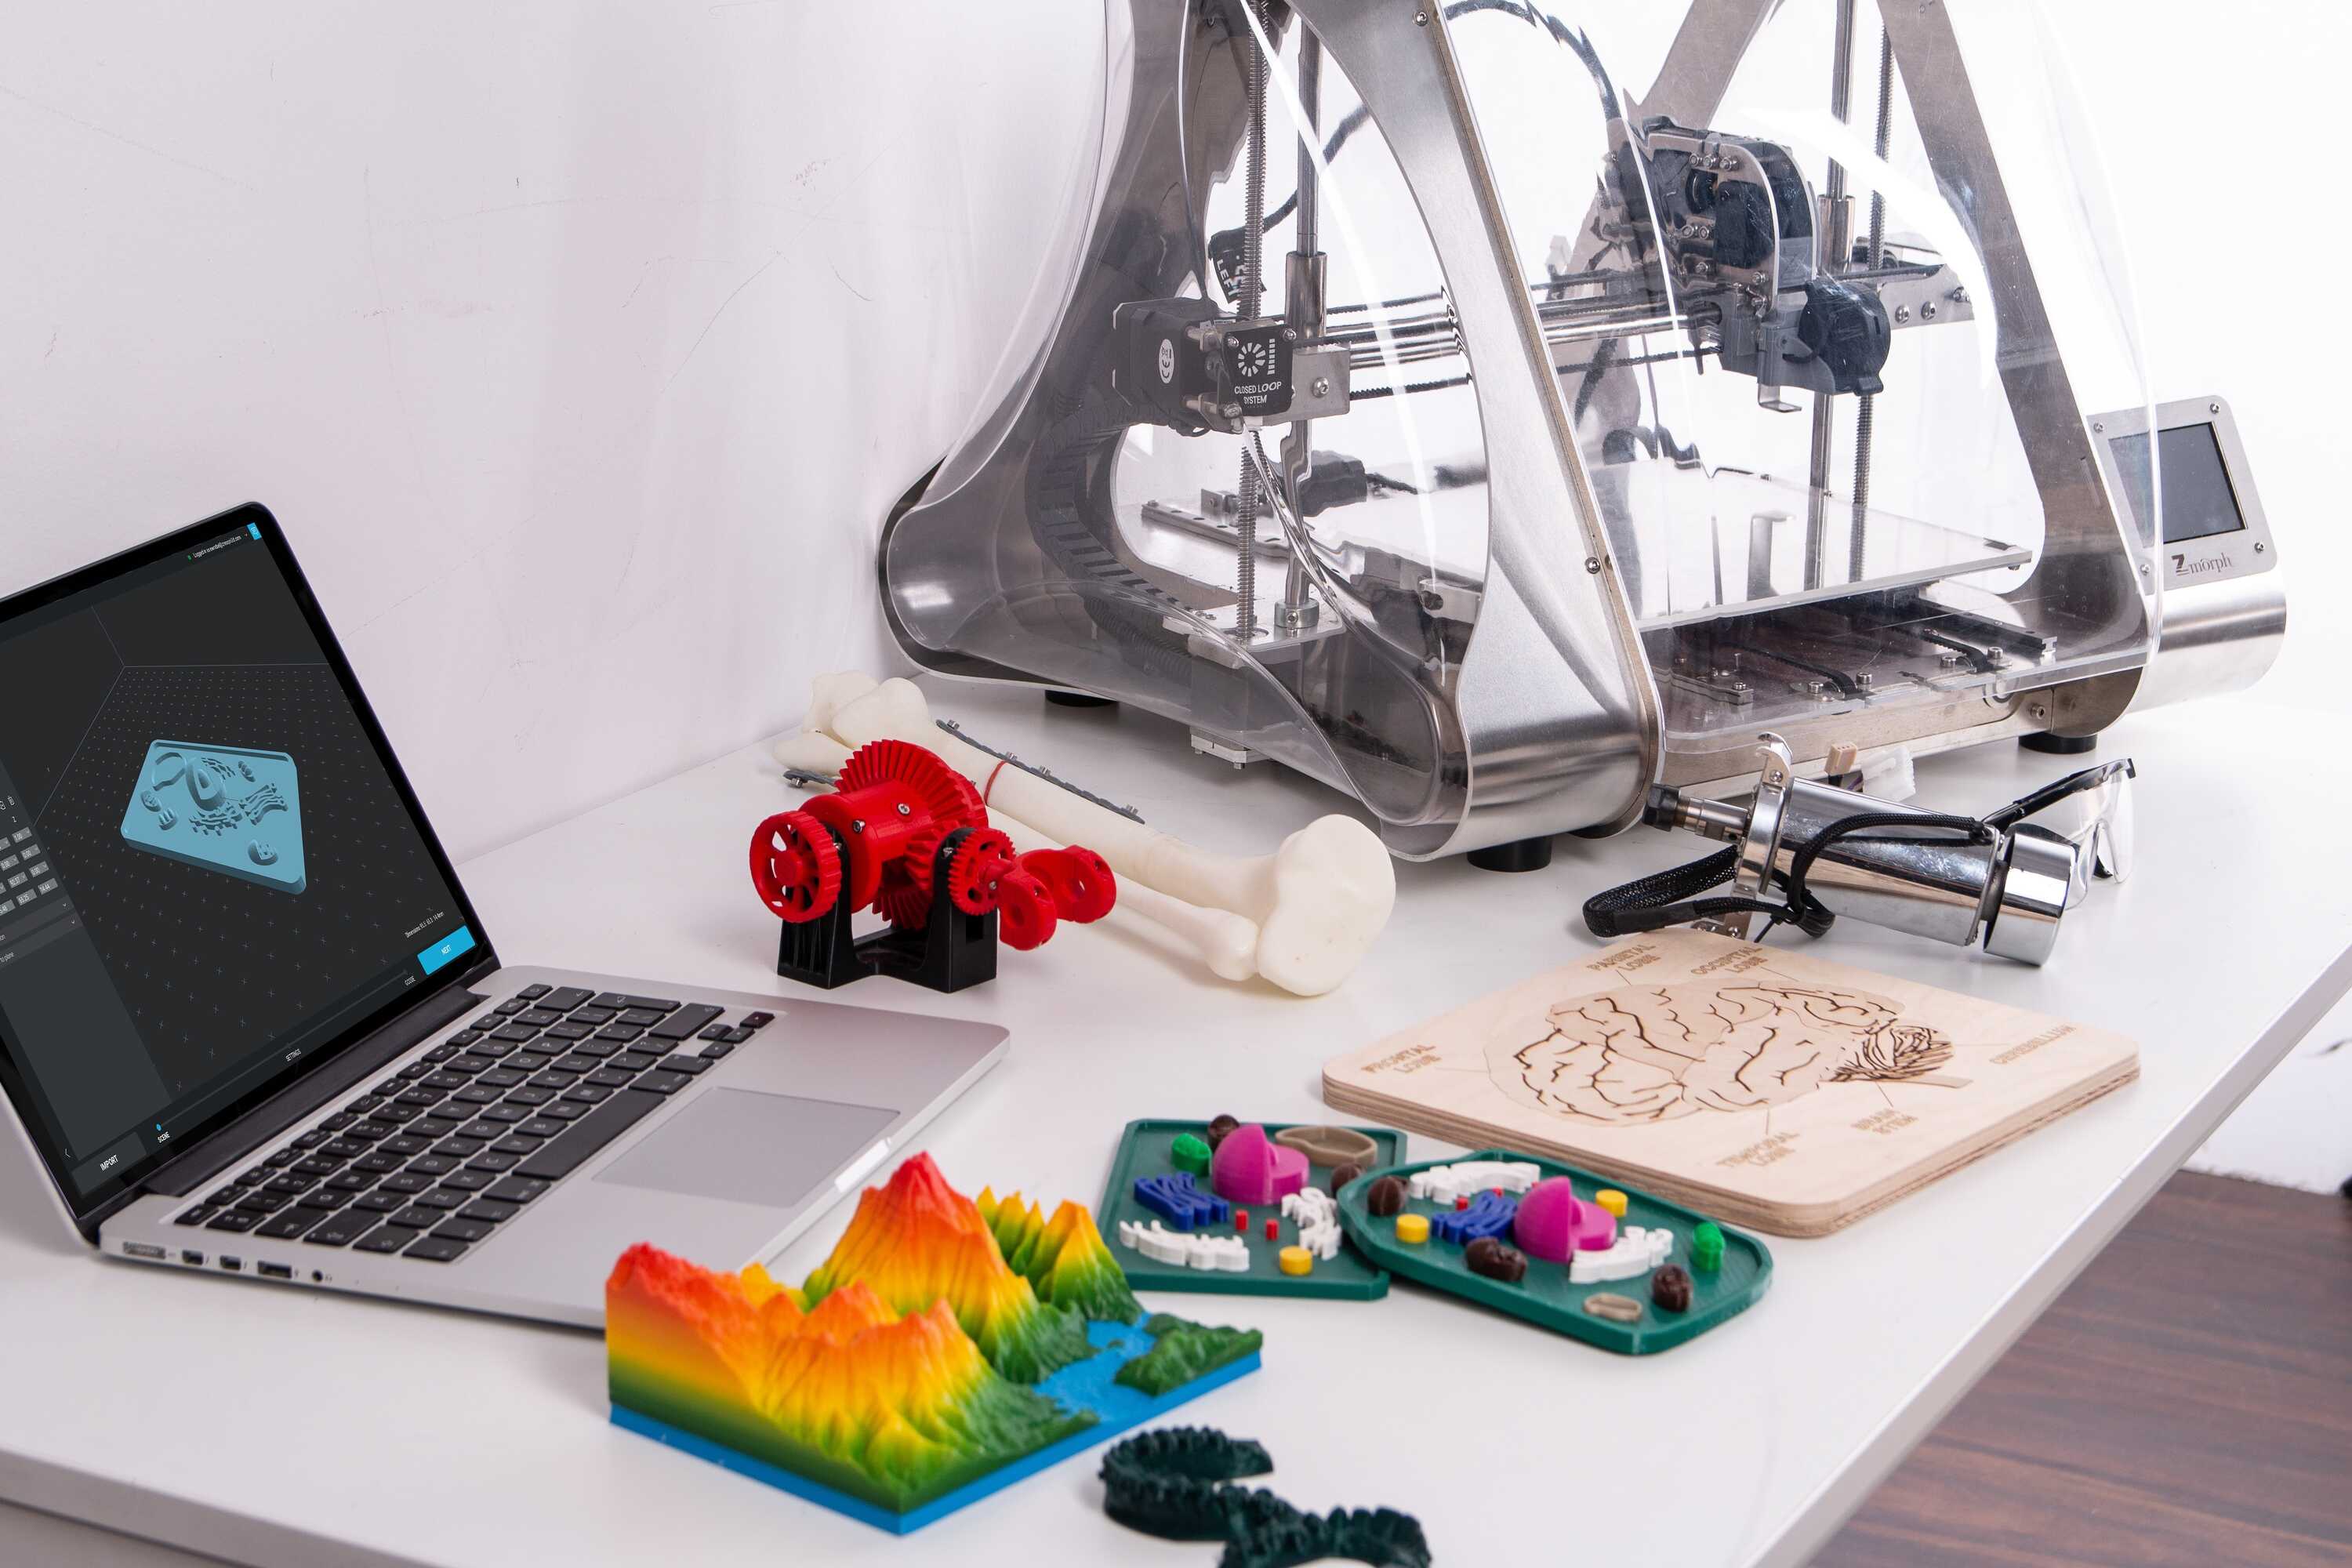 How Do You Make Things With A 3D Printer